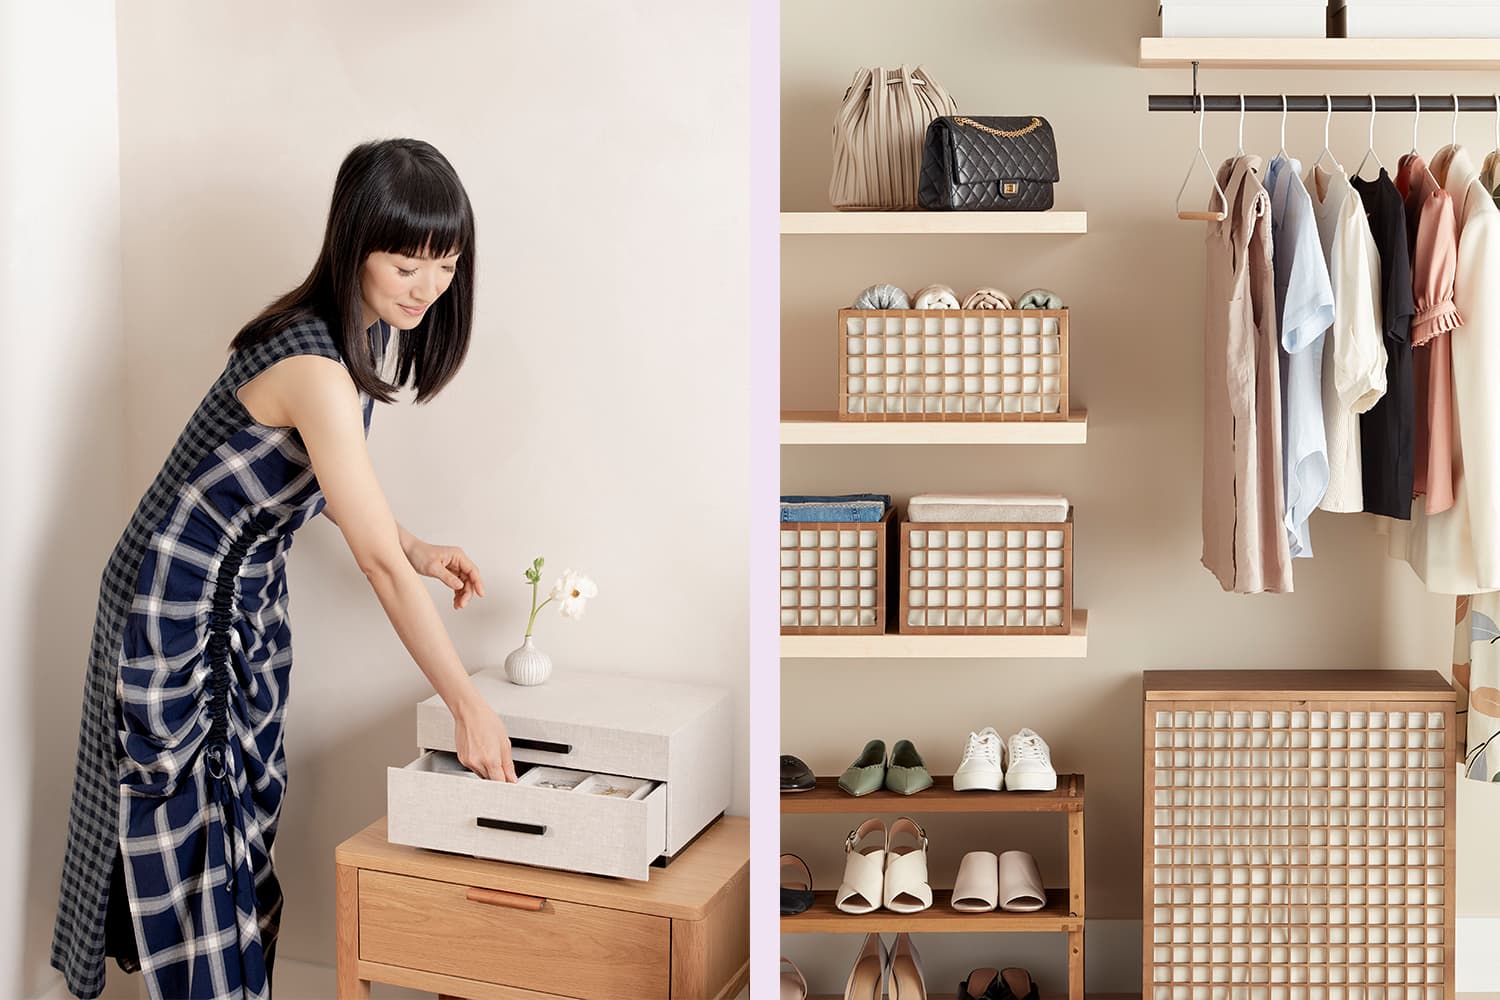 Marie Kondo's Collection at The Container Store “Sparks Joy”